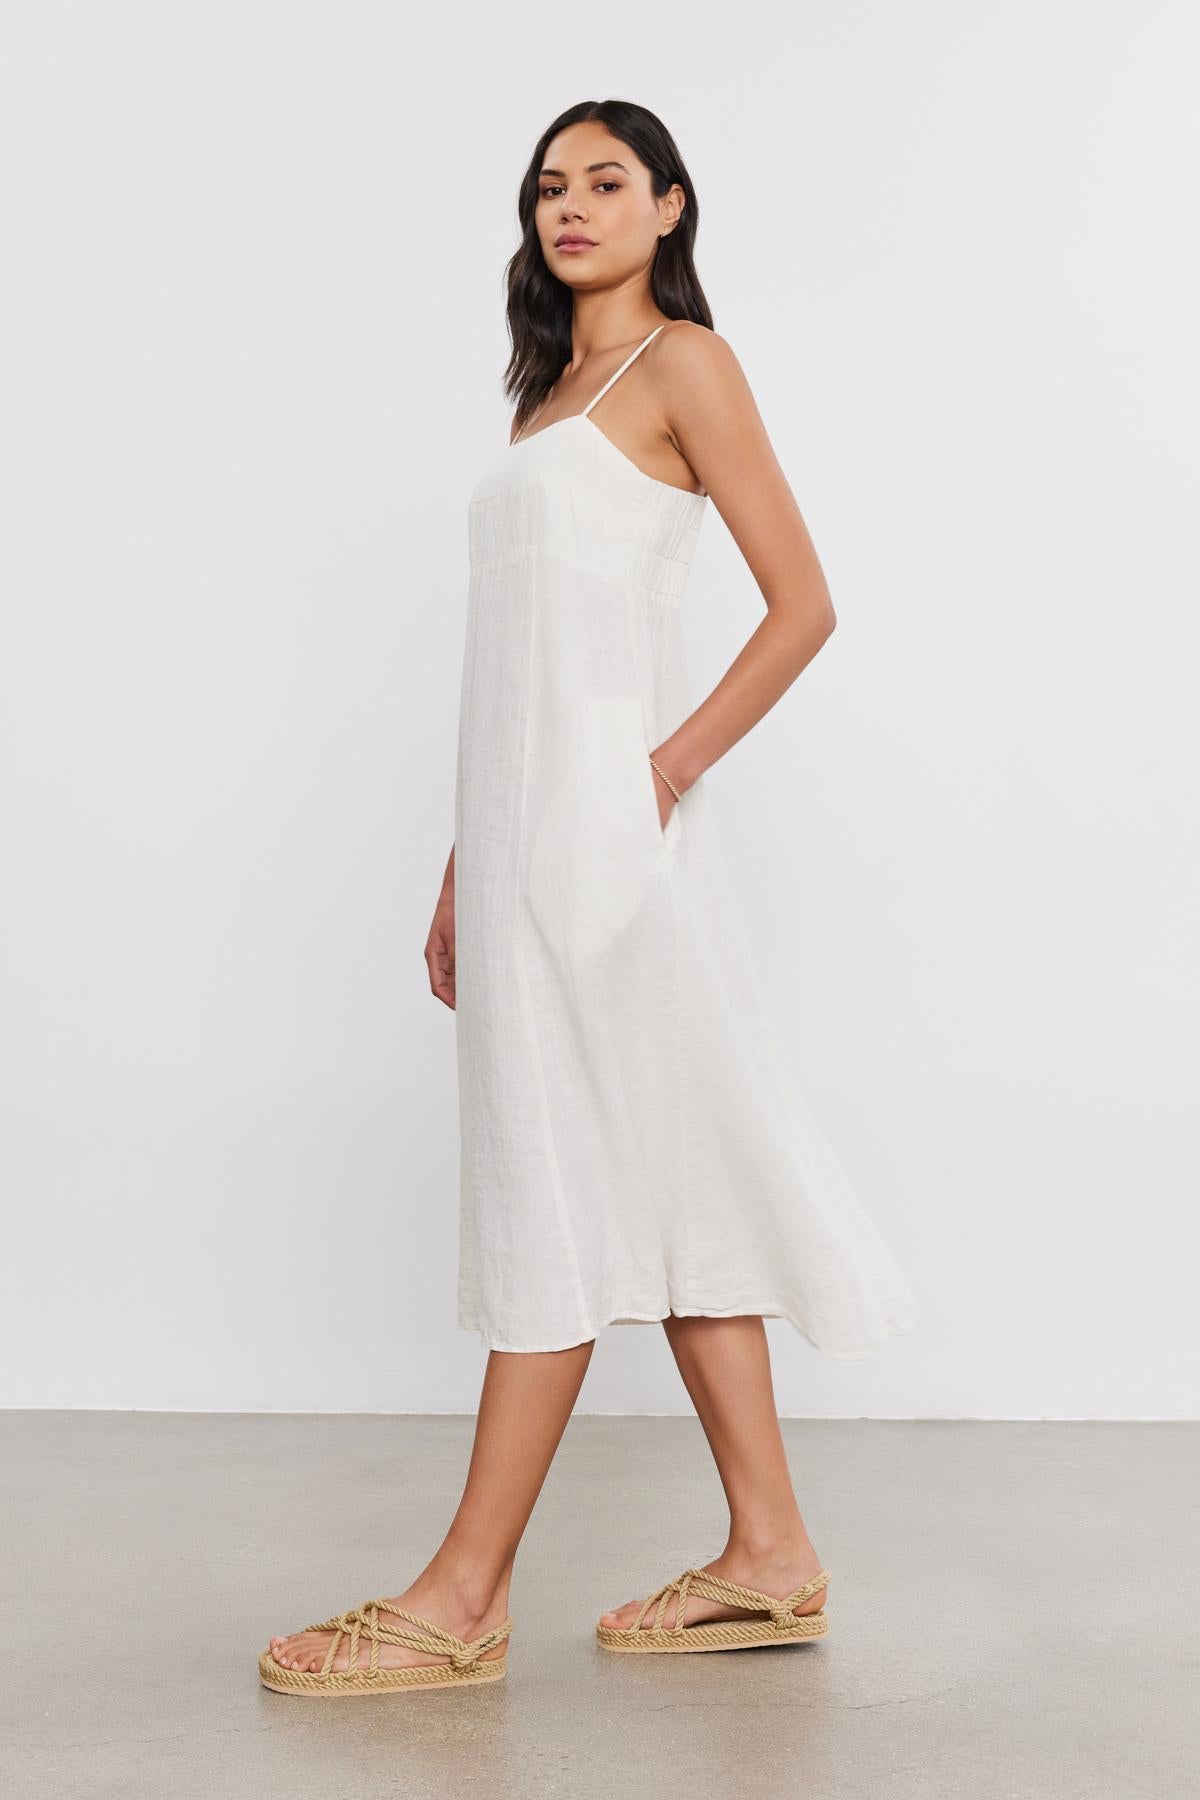   Woman wearing a sleeveless white midi dress (Stephie Linen Dress by Velvet by Graham & Spencer) and matching espadrilles, standing in a studio with a neutral background. 